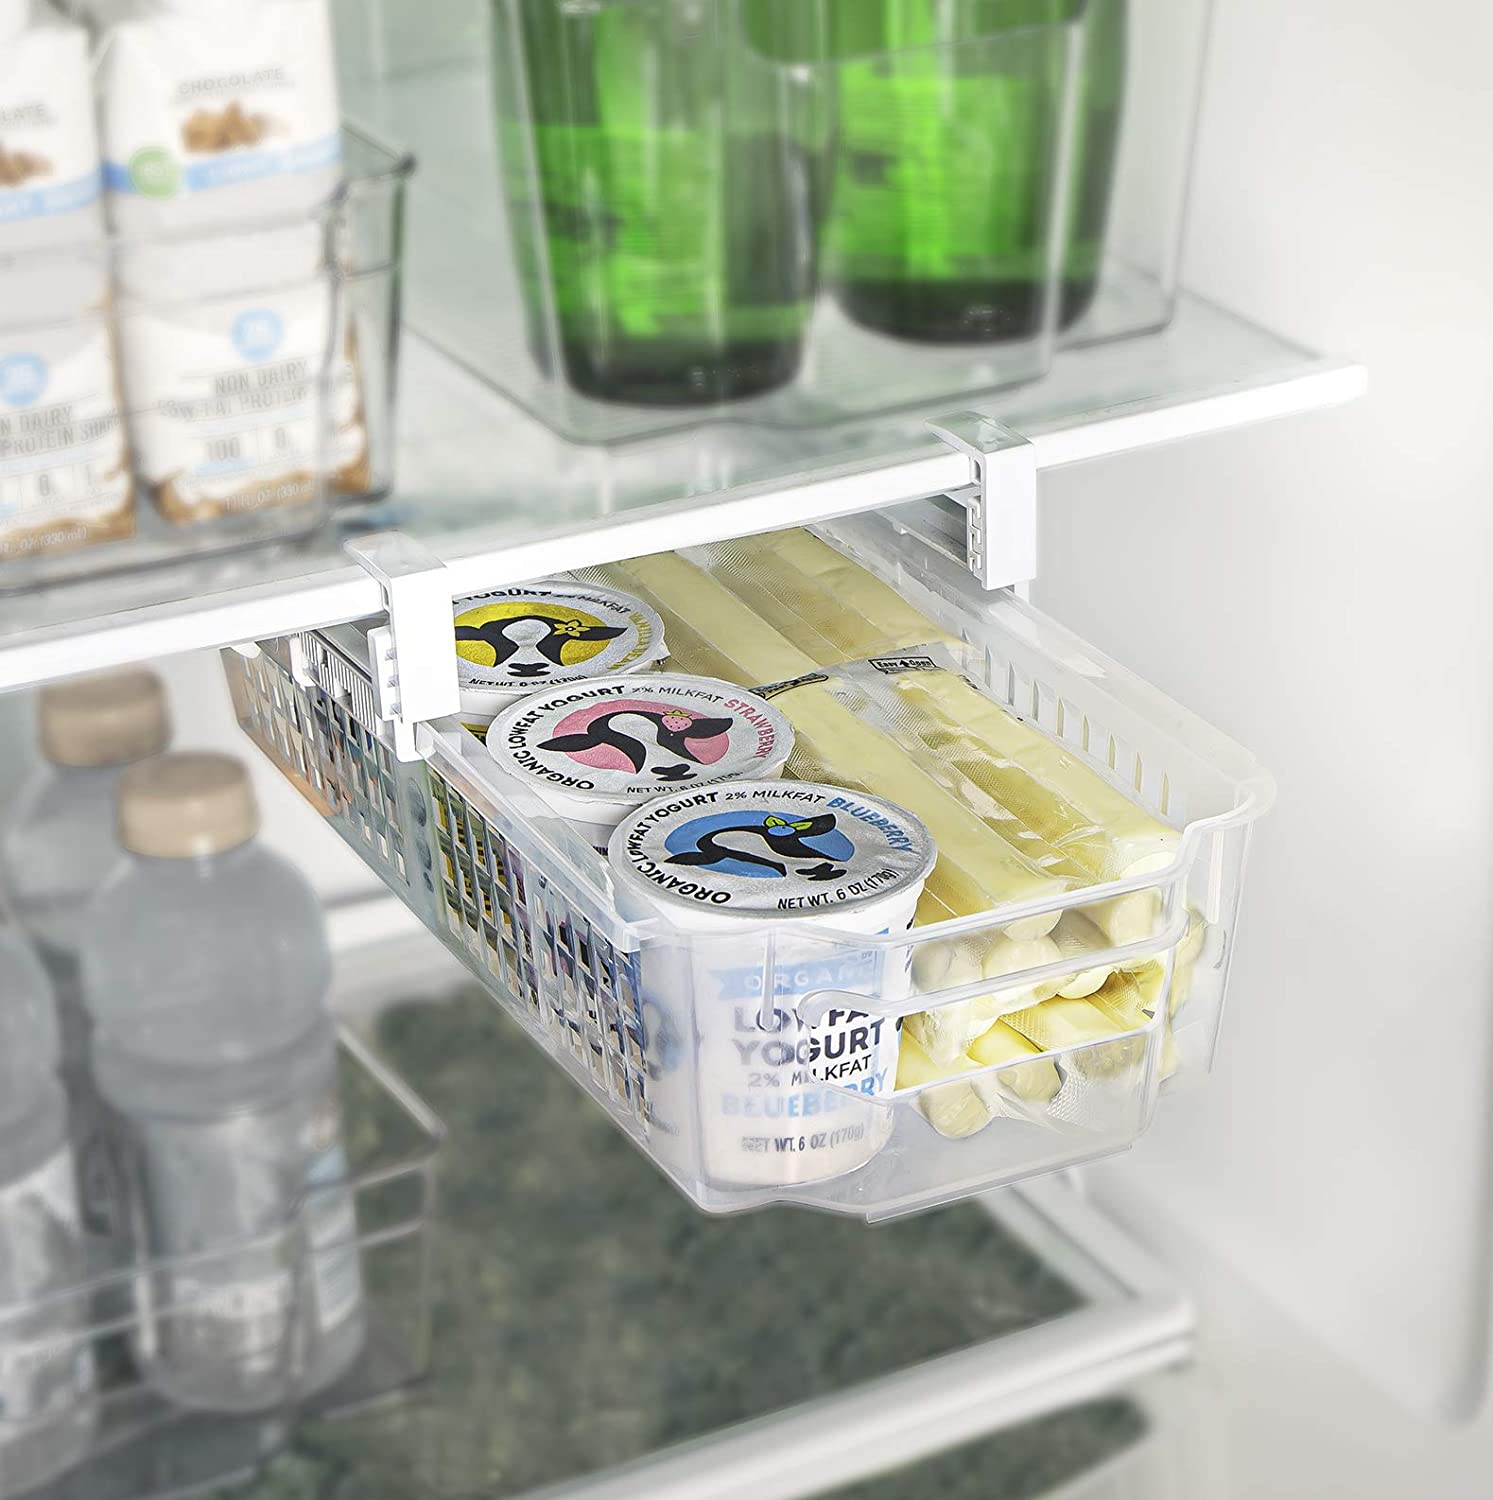 Smart Design Hanging Zip Bag Pull Out Refrigerator Drawer - Clear